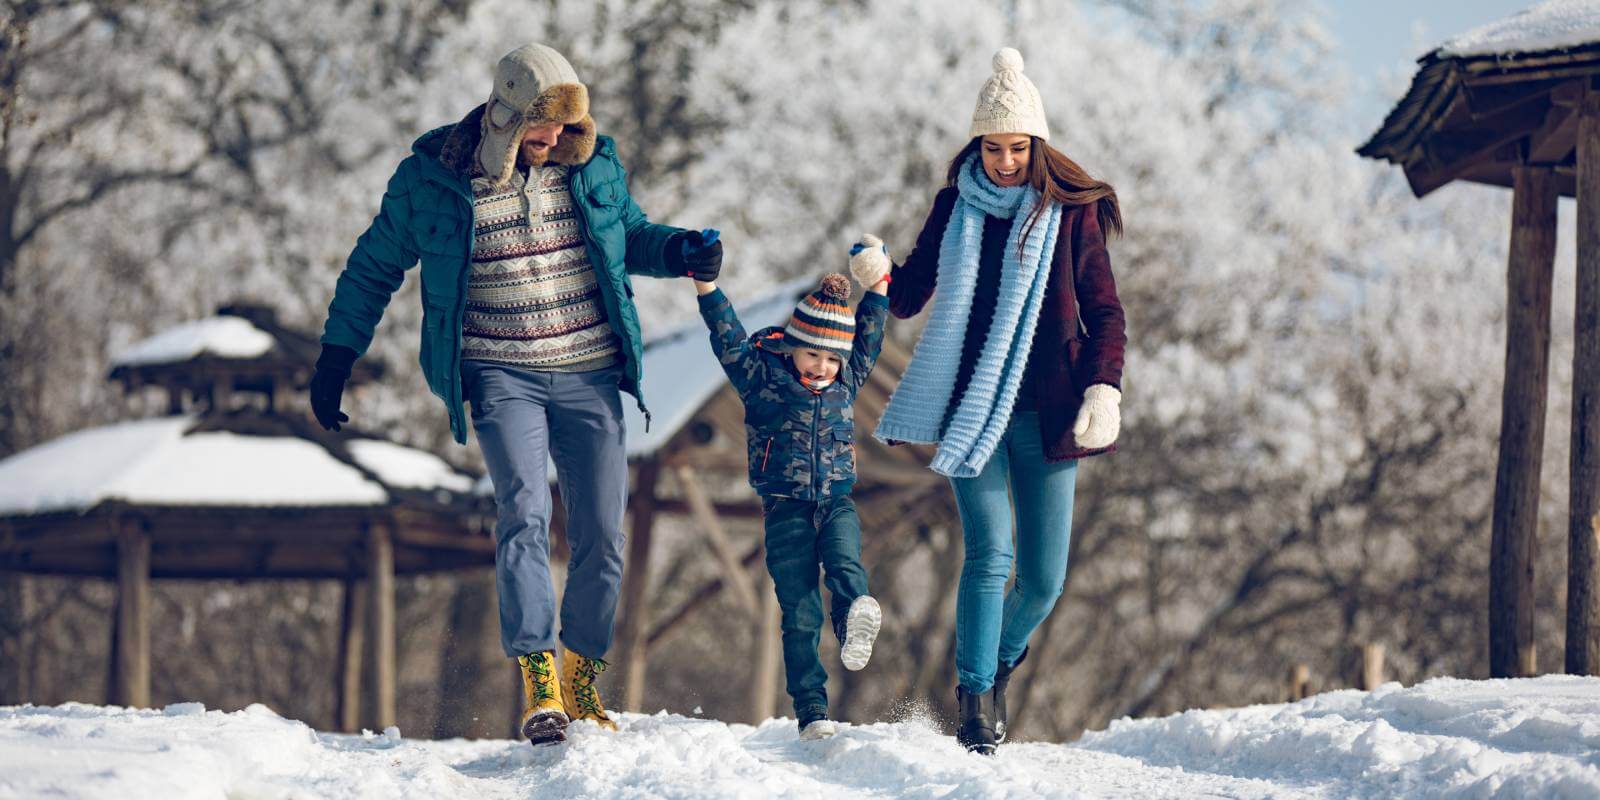 Find winter family photo ideas with Nixplay